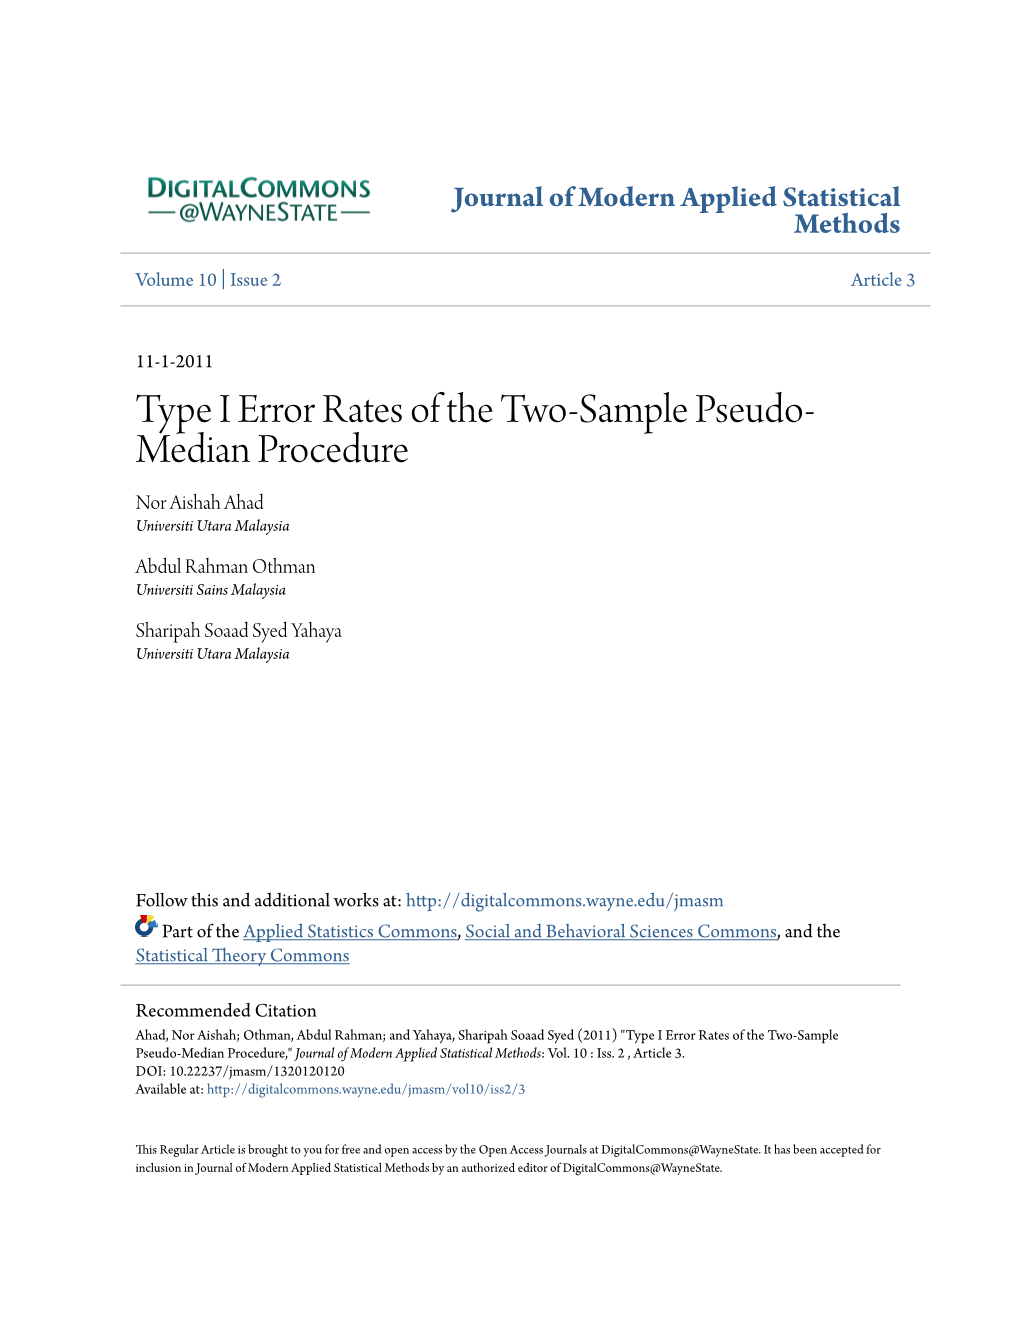 Type I Error Rates of the Two-Sample Pseudo-Median Procedure," Journal of Modern Applied Statistical Methods: Vol